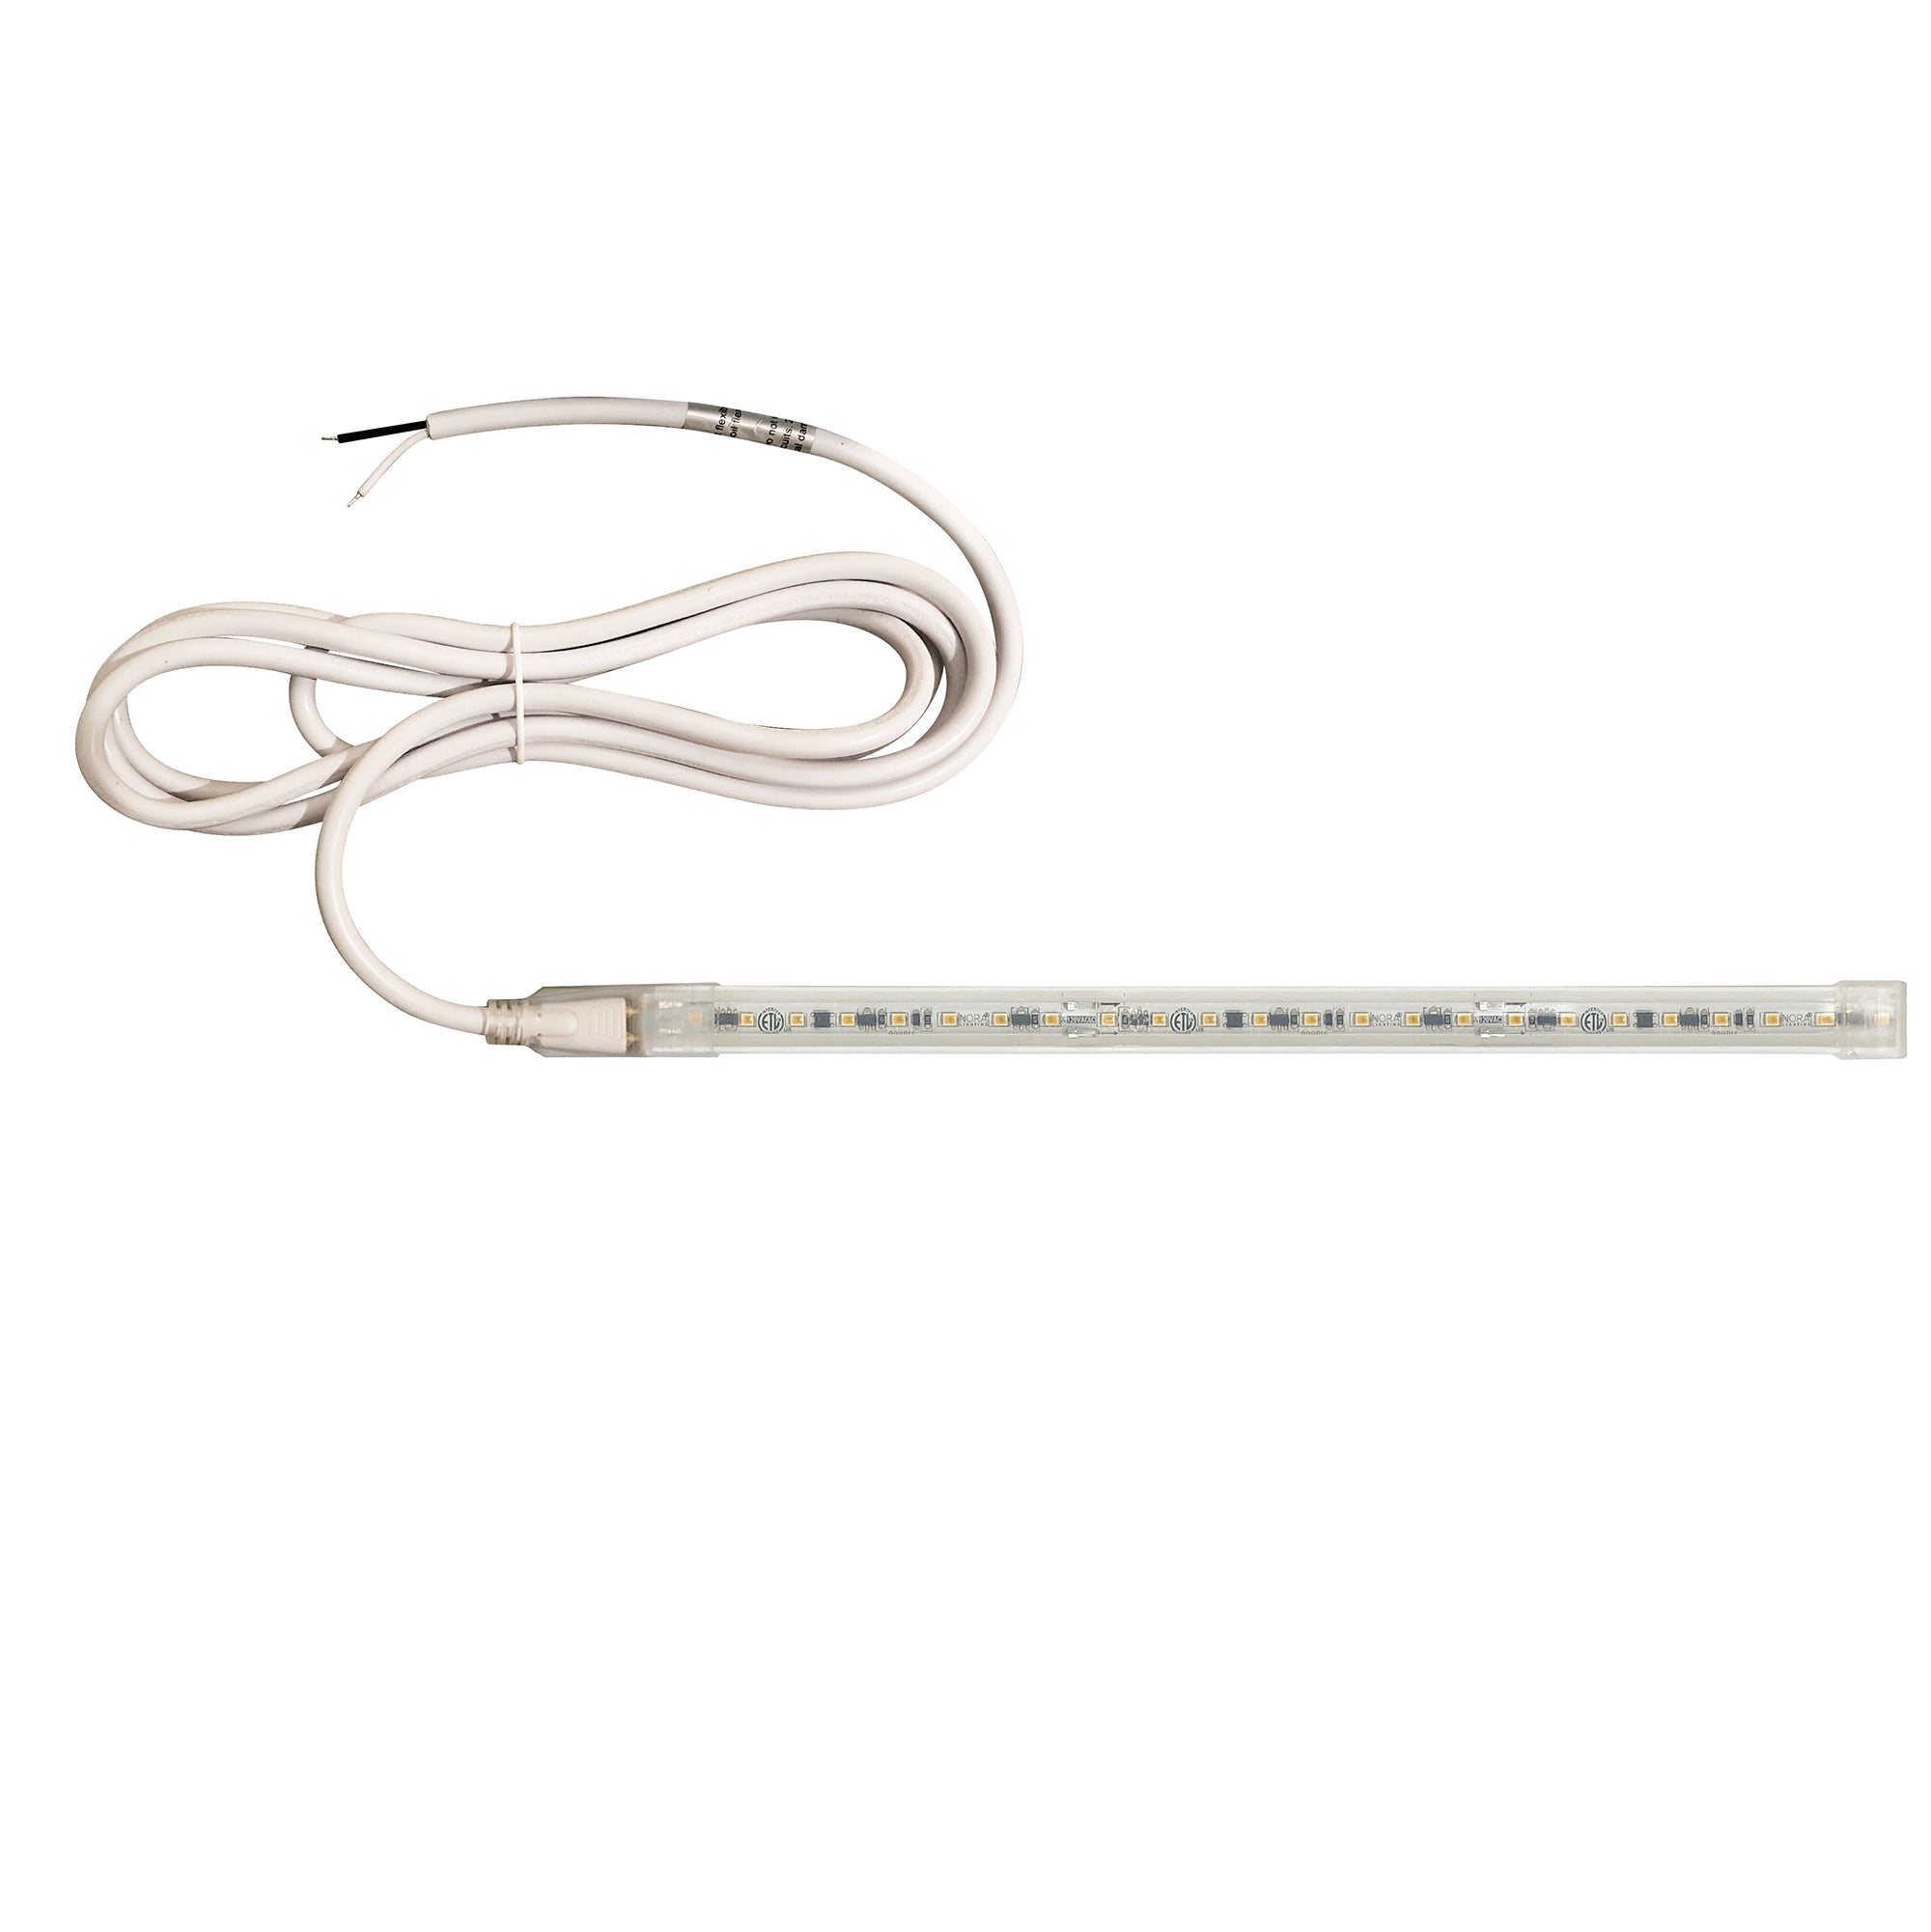 Nora Lighting NUTP13-W12-4-12-930/HW - Accent / Undercabinet - Custom Cut 12-ft, 4-in 120V Continuous LED Tape Light, 330lm / 3.6W per foot, 3000K, w/ Mounting Clips and 8' Hardwired Power Cord